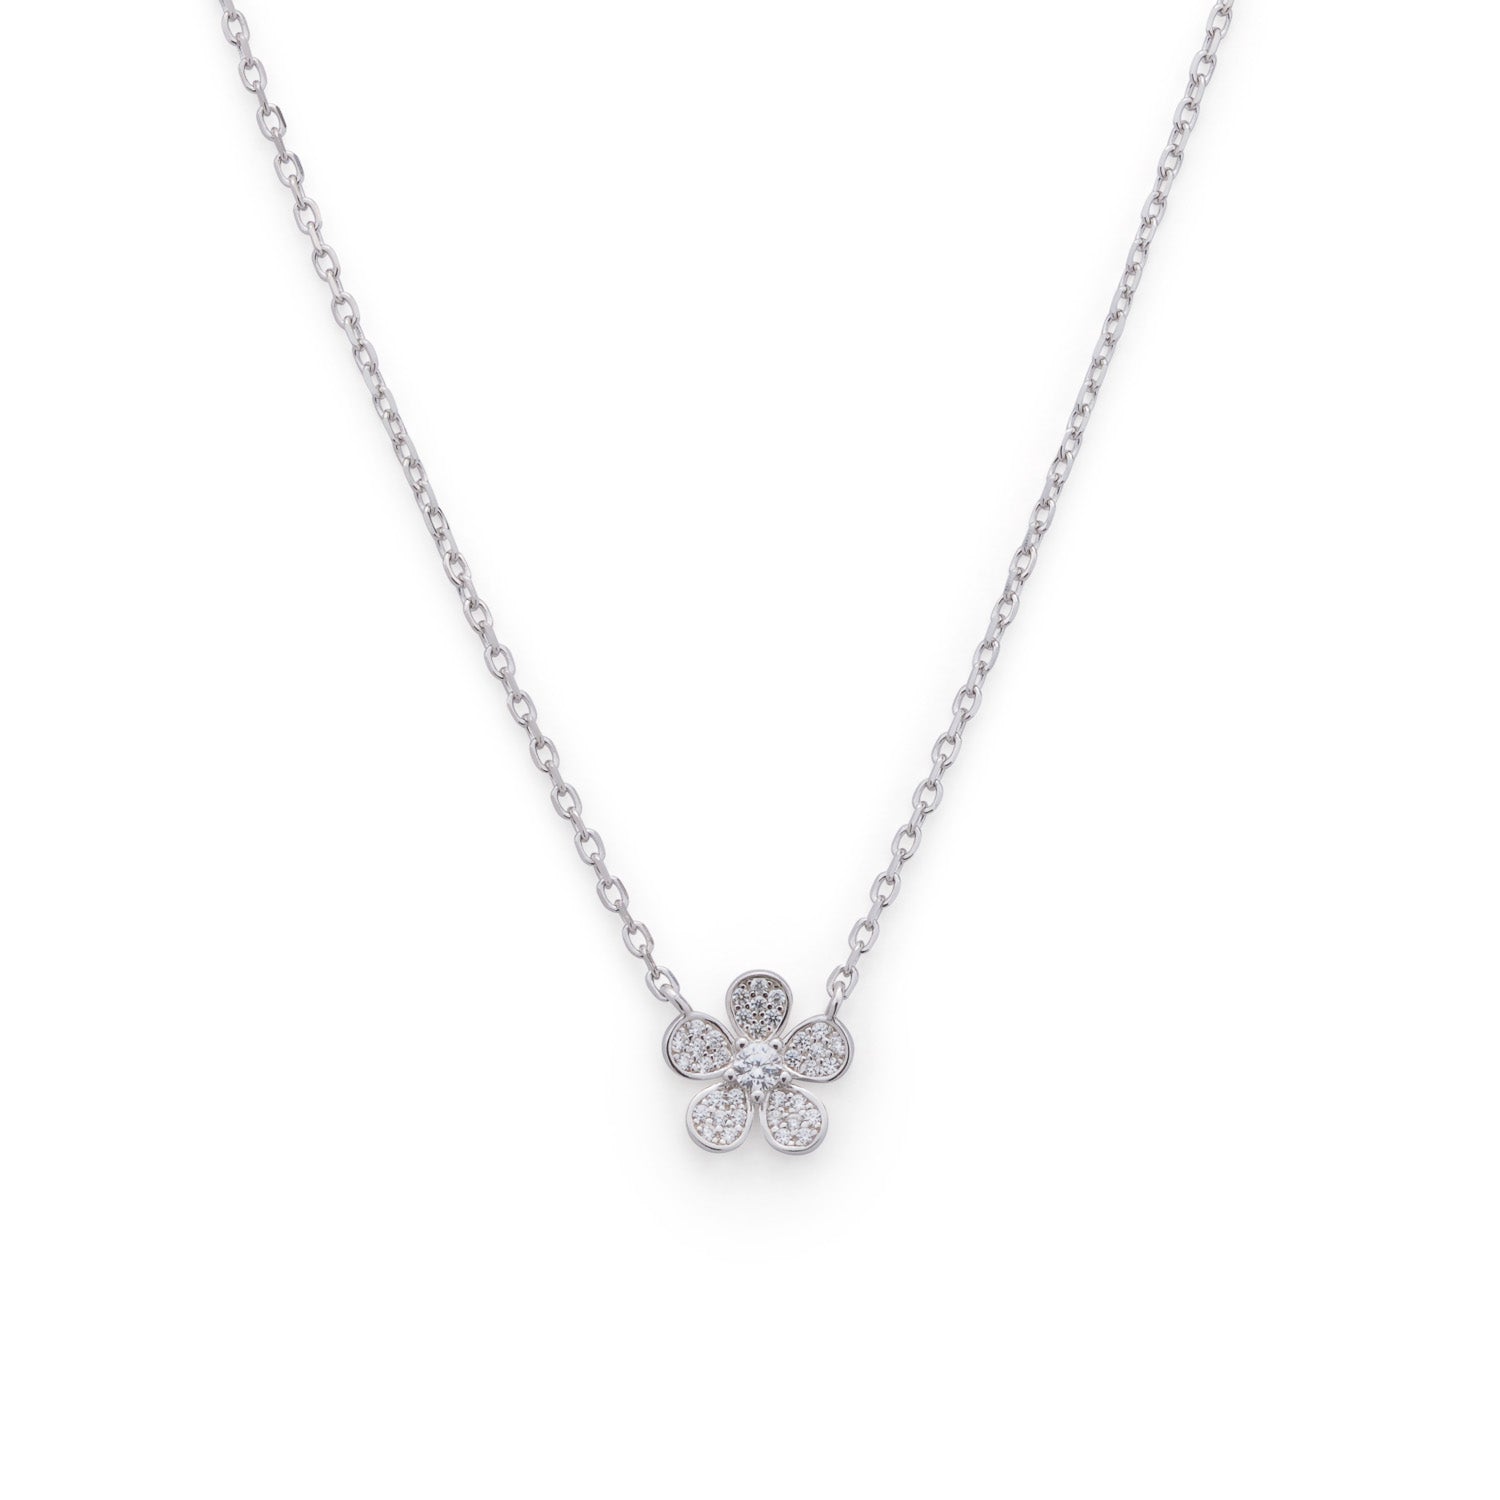 Daisy Silver Necklace with Cubic Zirconia